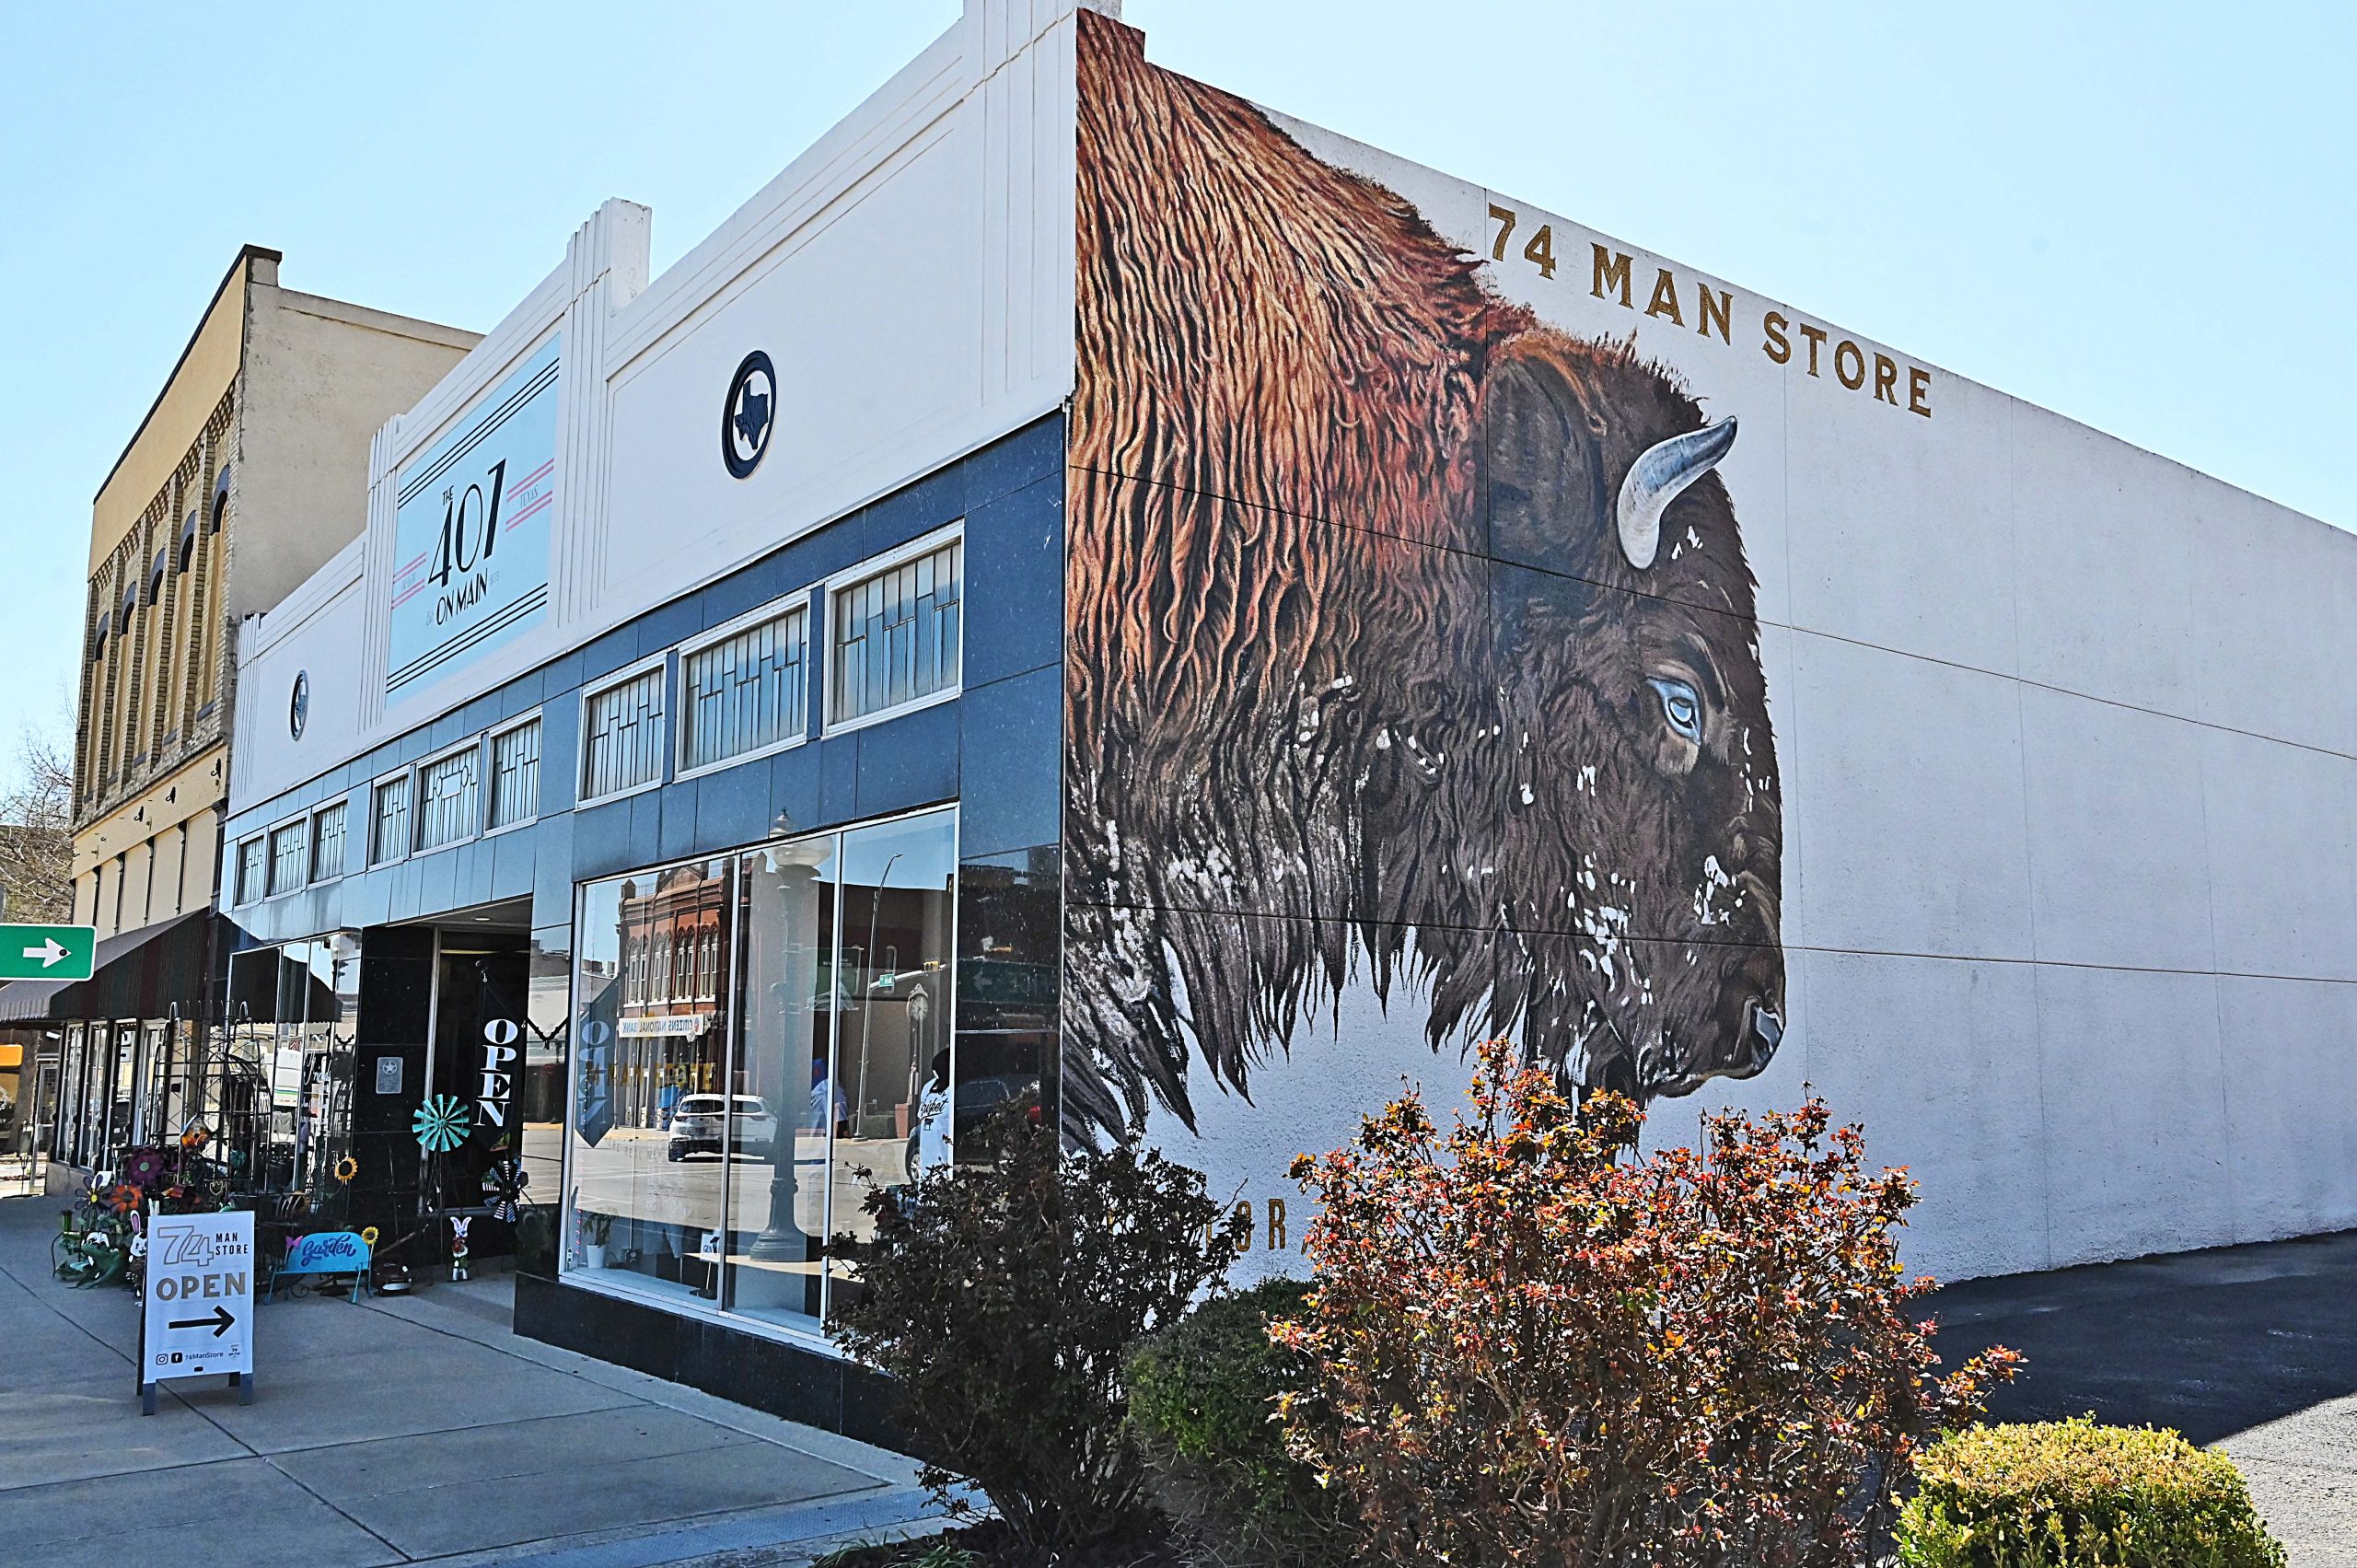 74 Man Store Building and Buffalo Mural